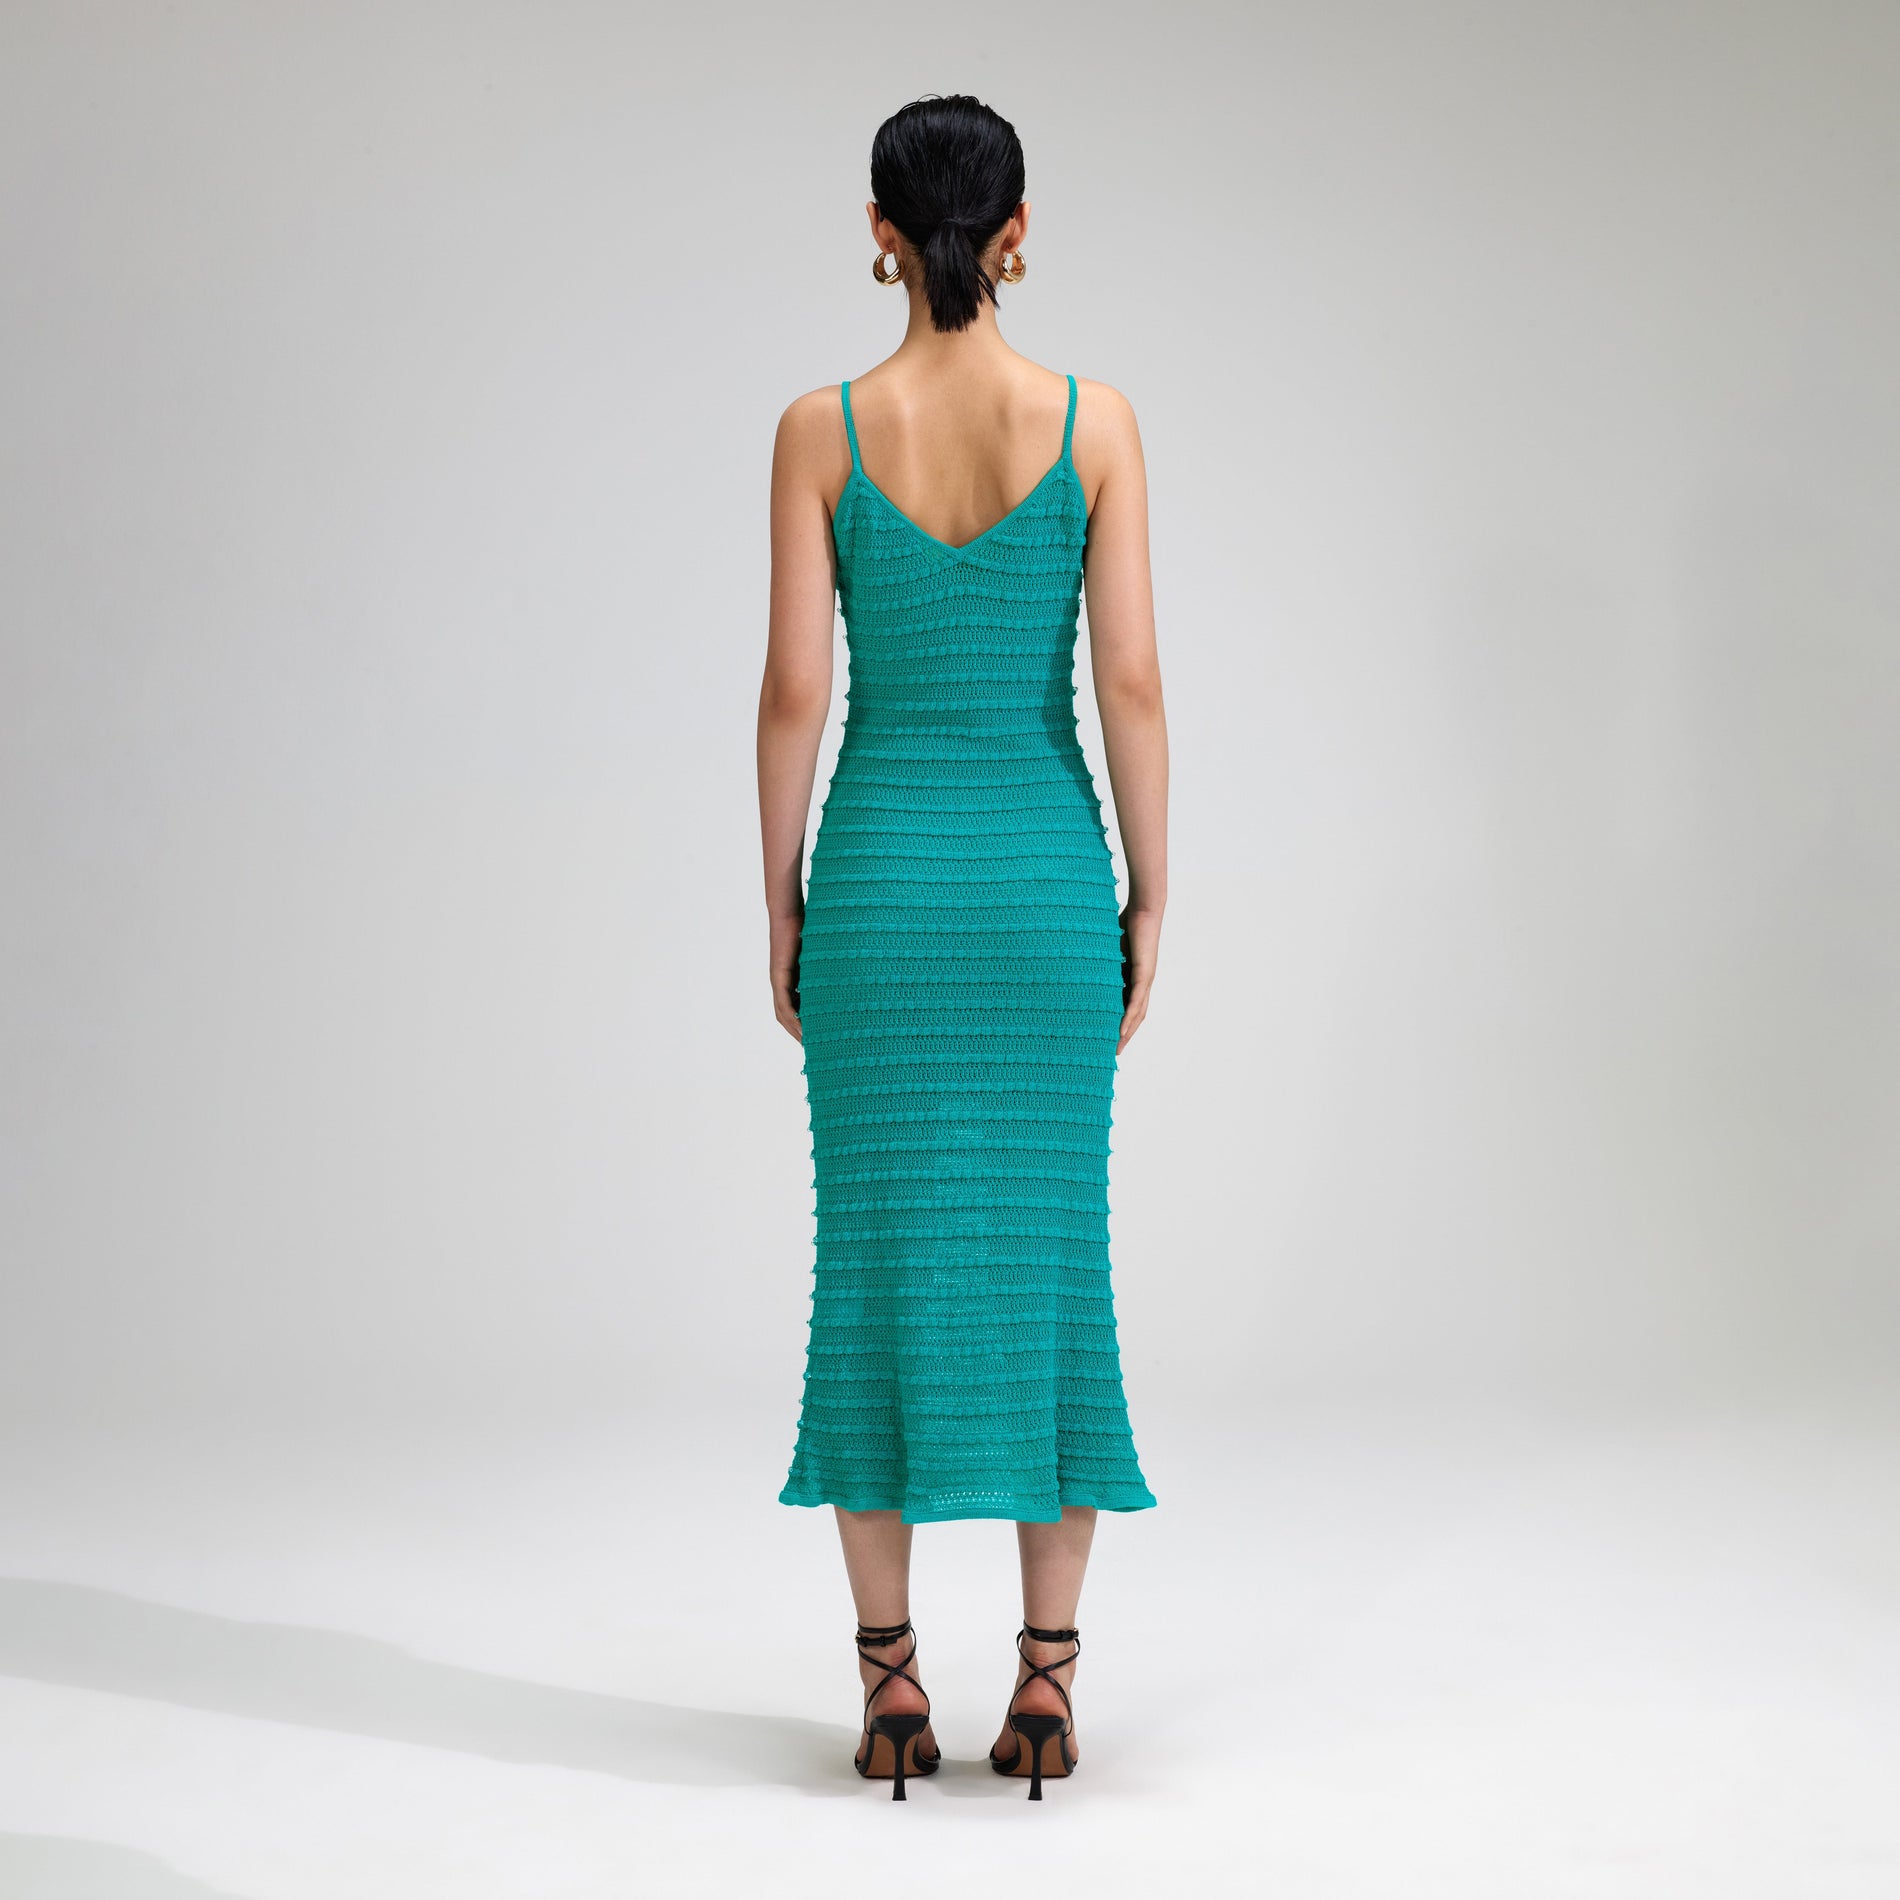 A woman wearing the Green Beaded Strappy Knit Midi Dress